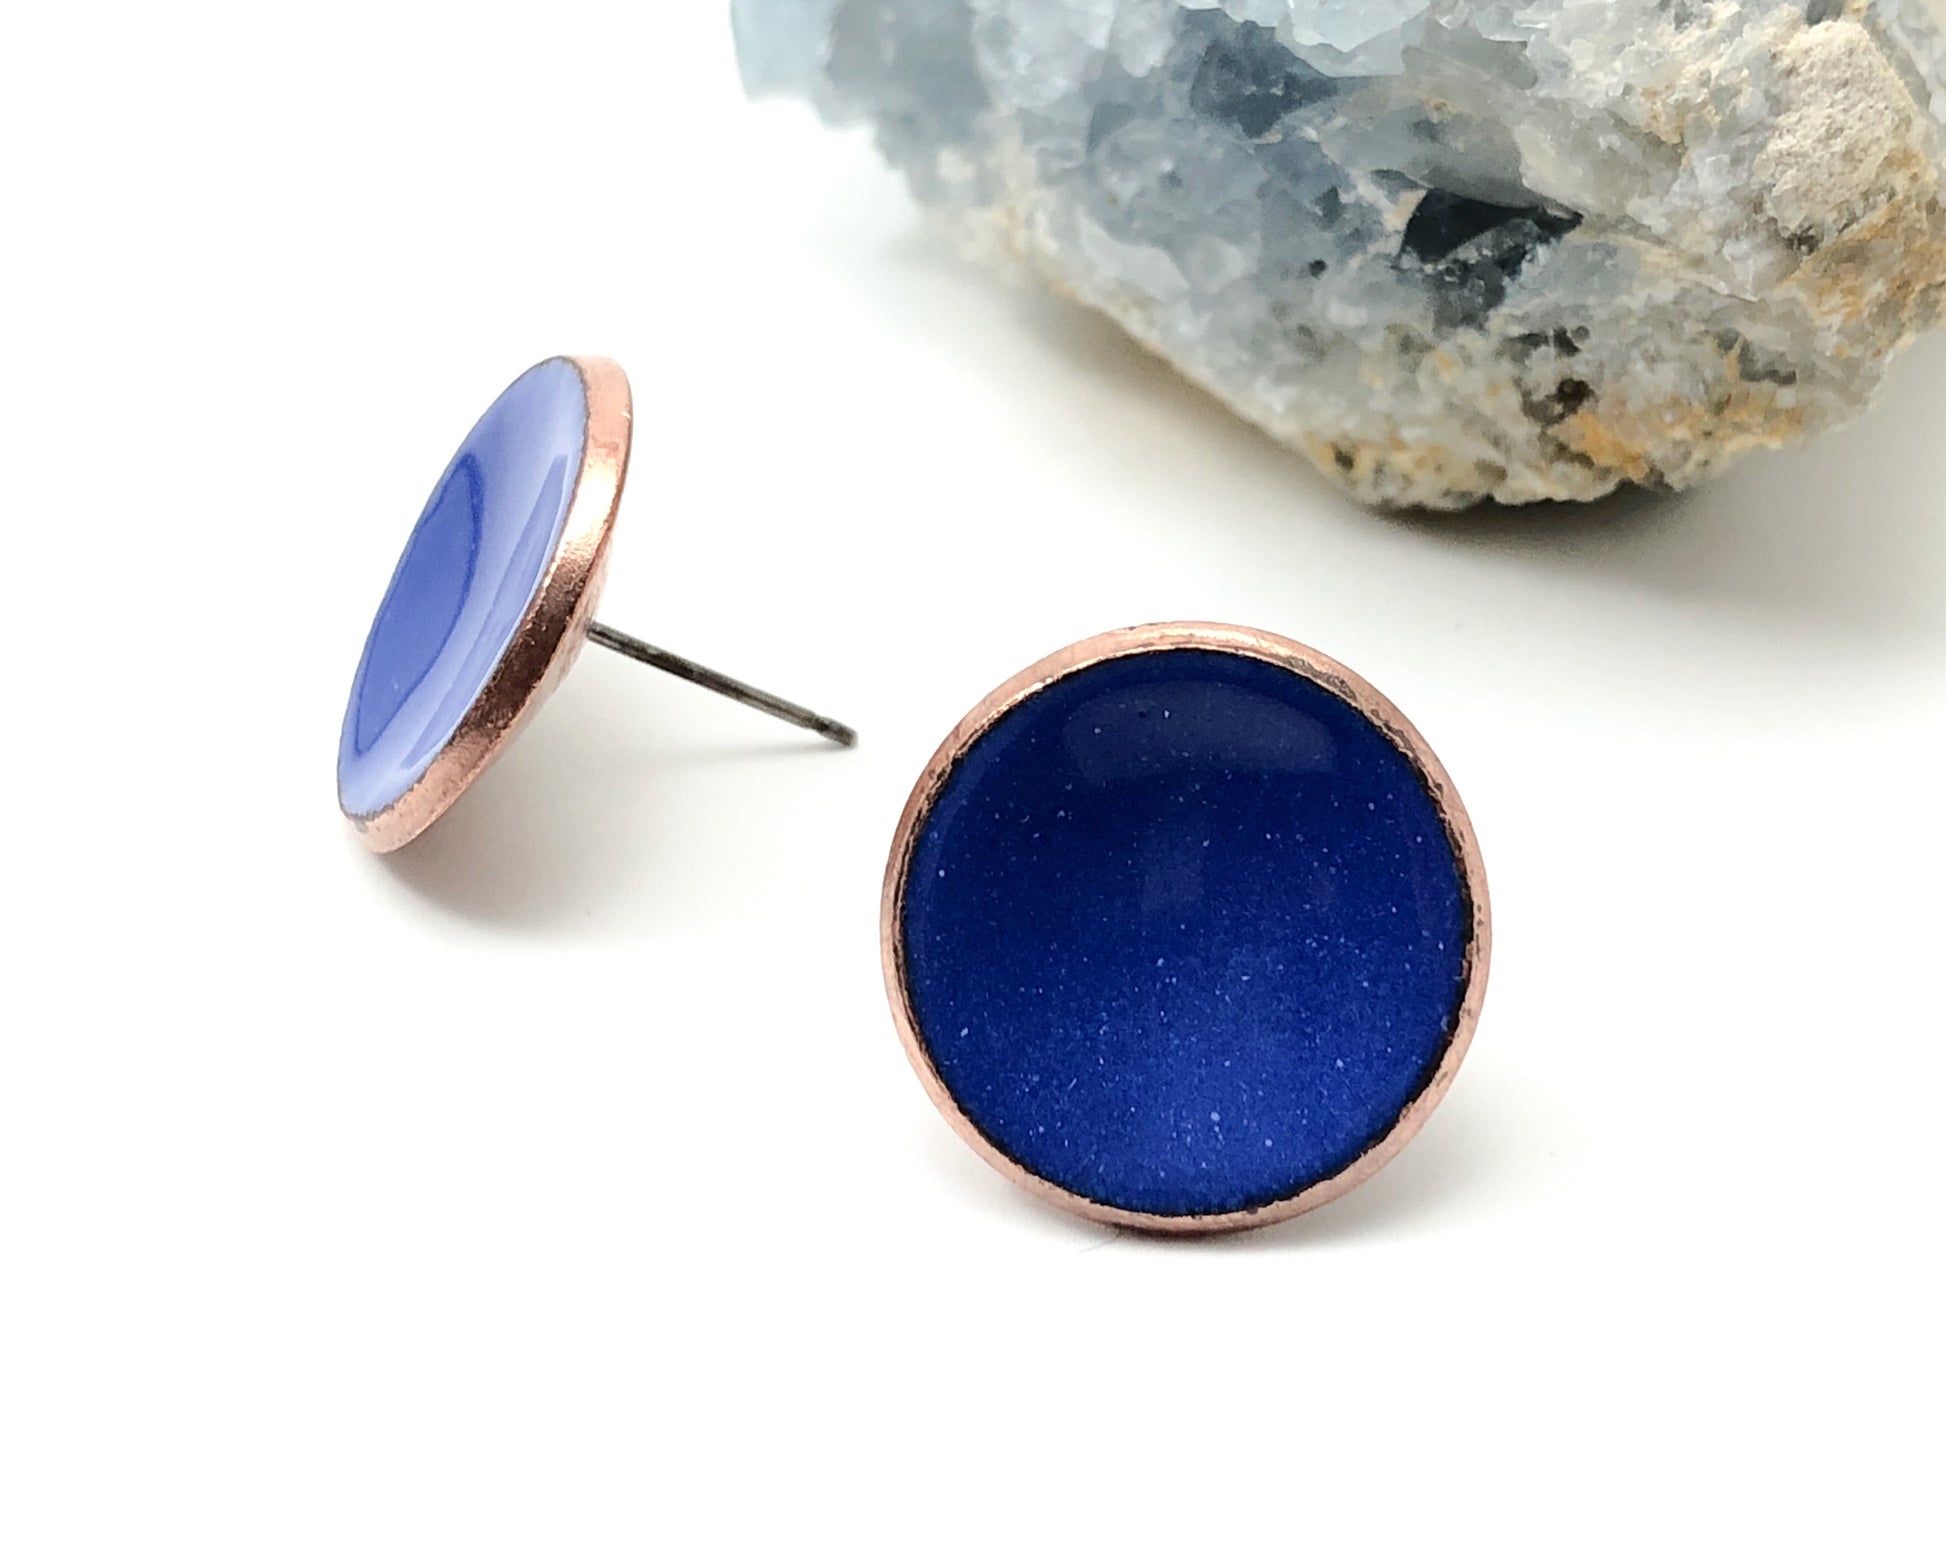 a pair of blue studs sitting next to a rock